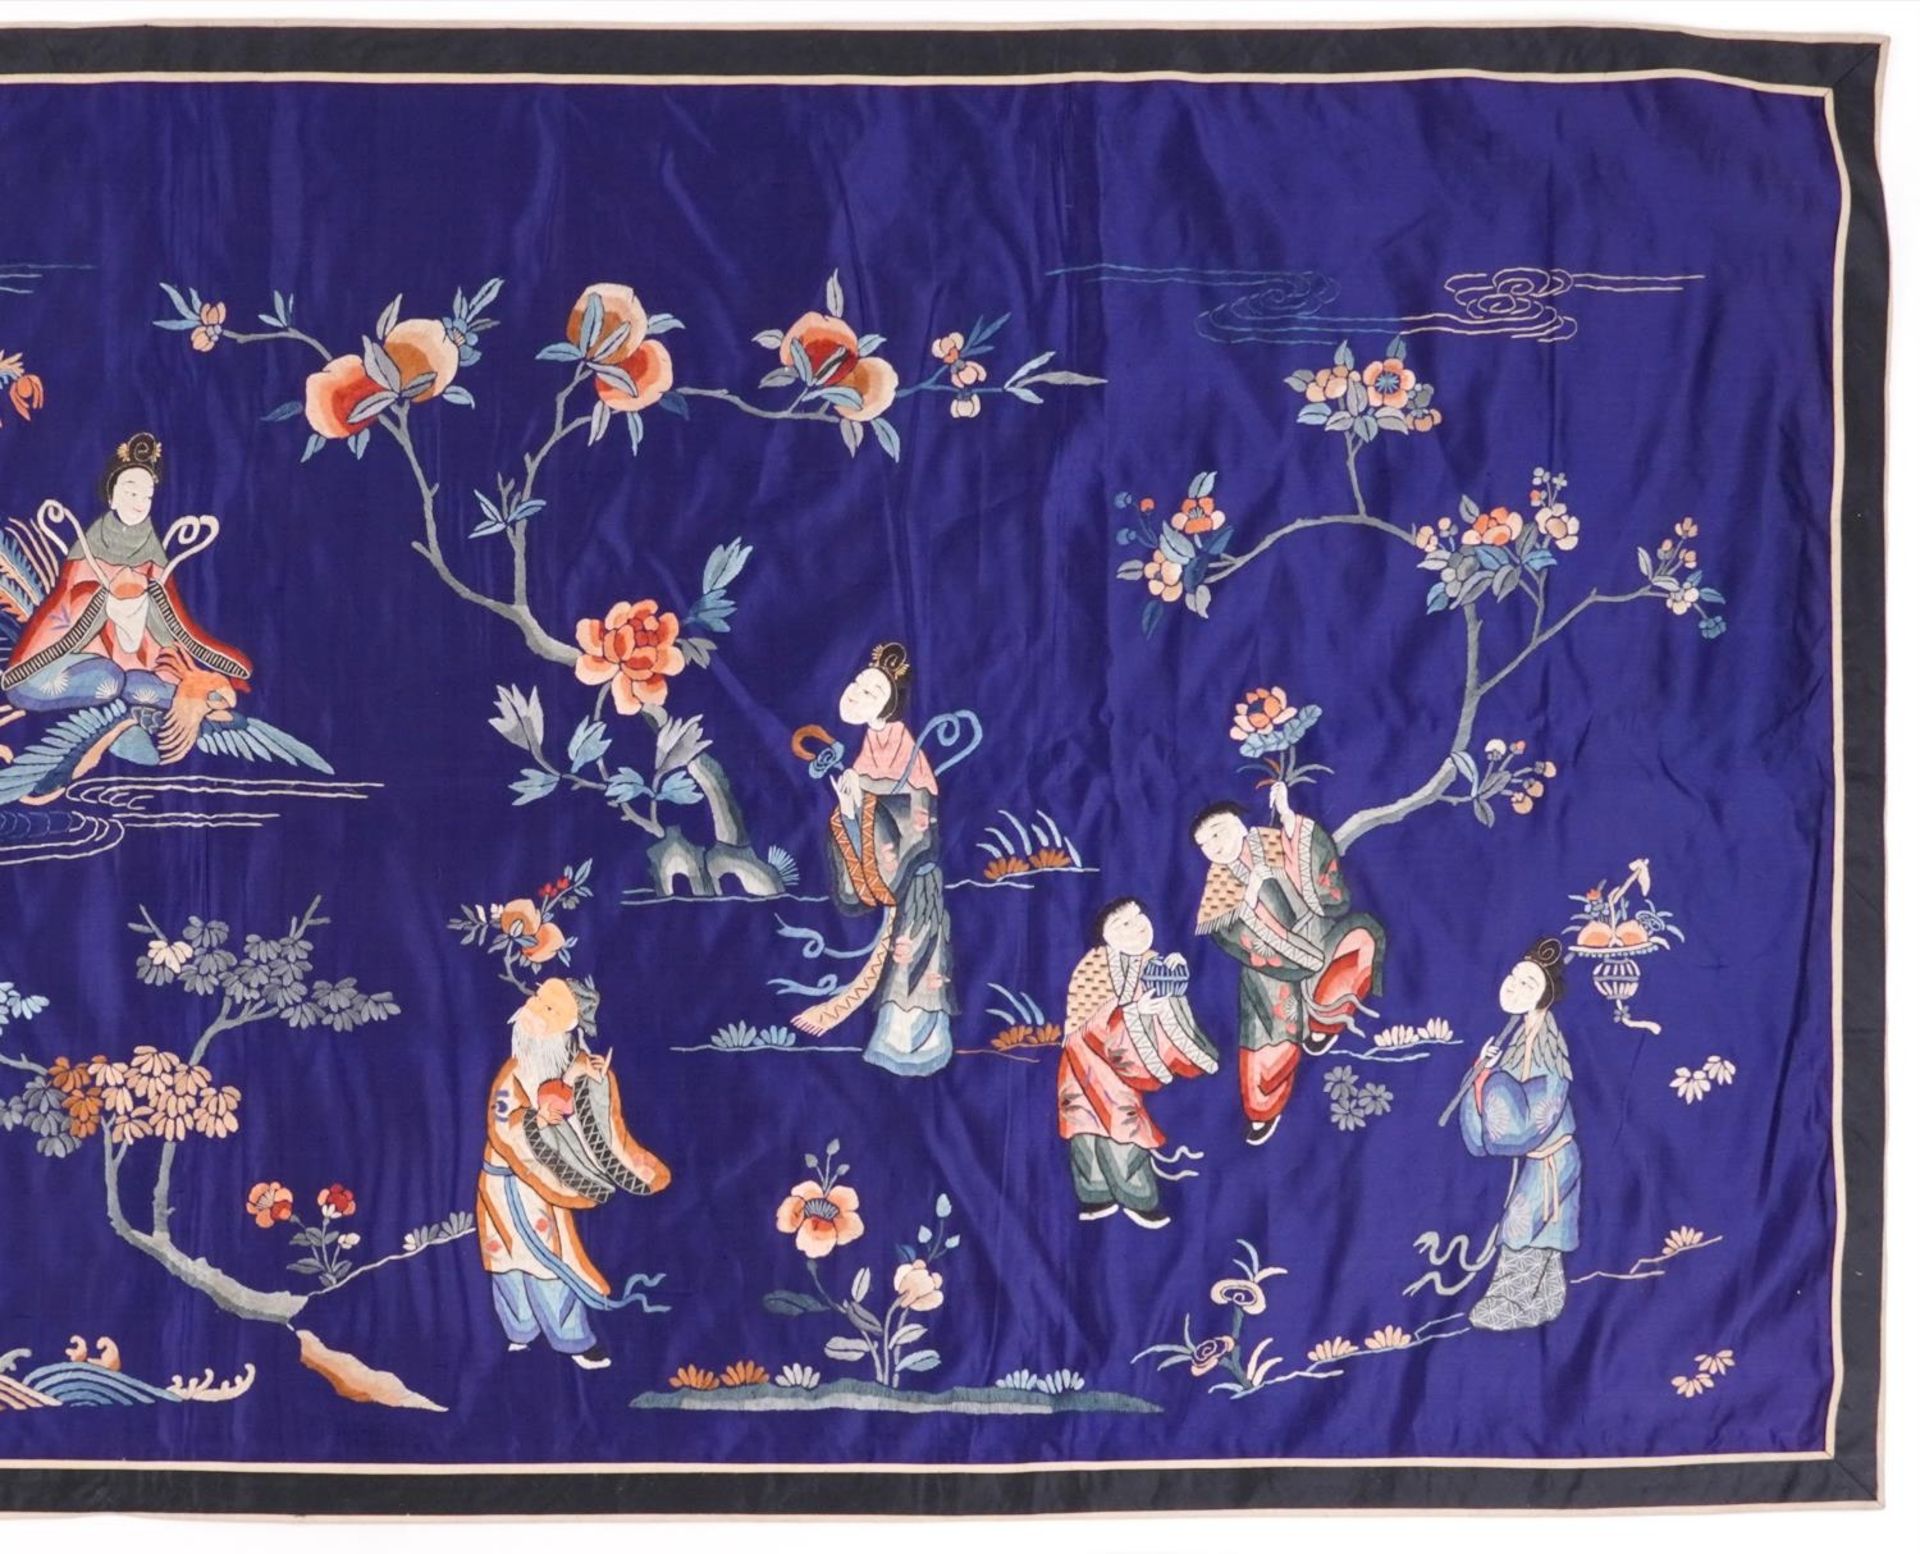 Large Chinese silk textile embroidered with an emperor amongst Geishas and figures, one riding a - Image 3 of 4